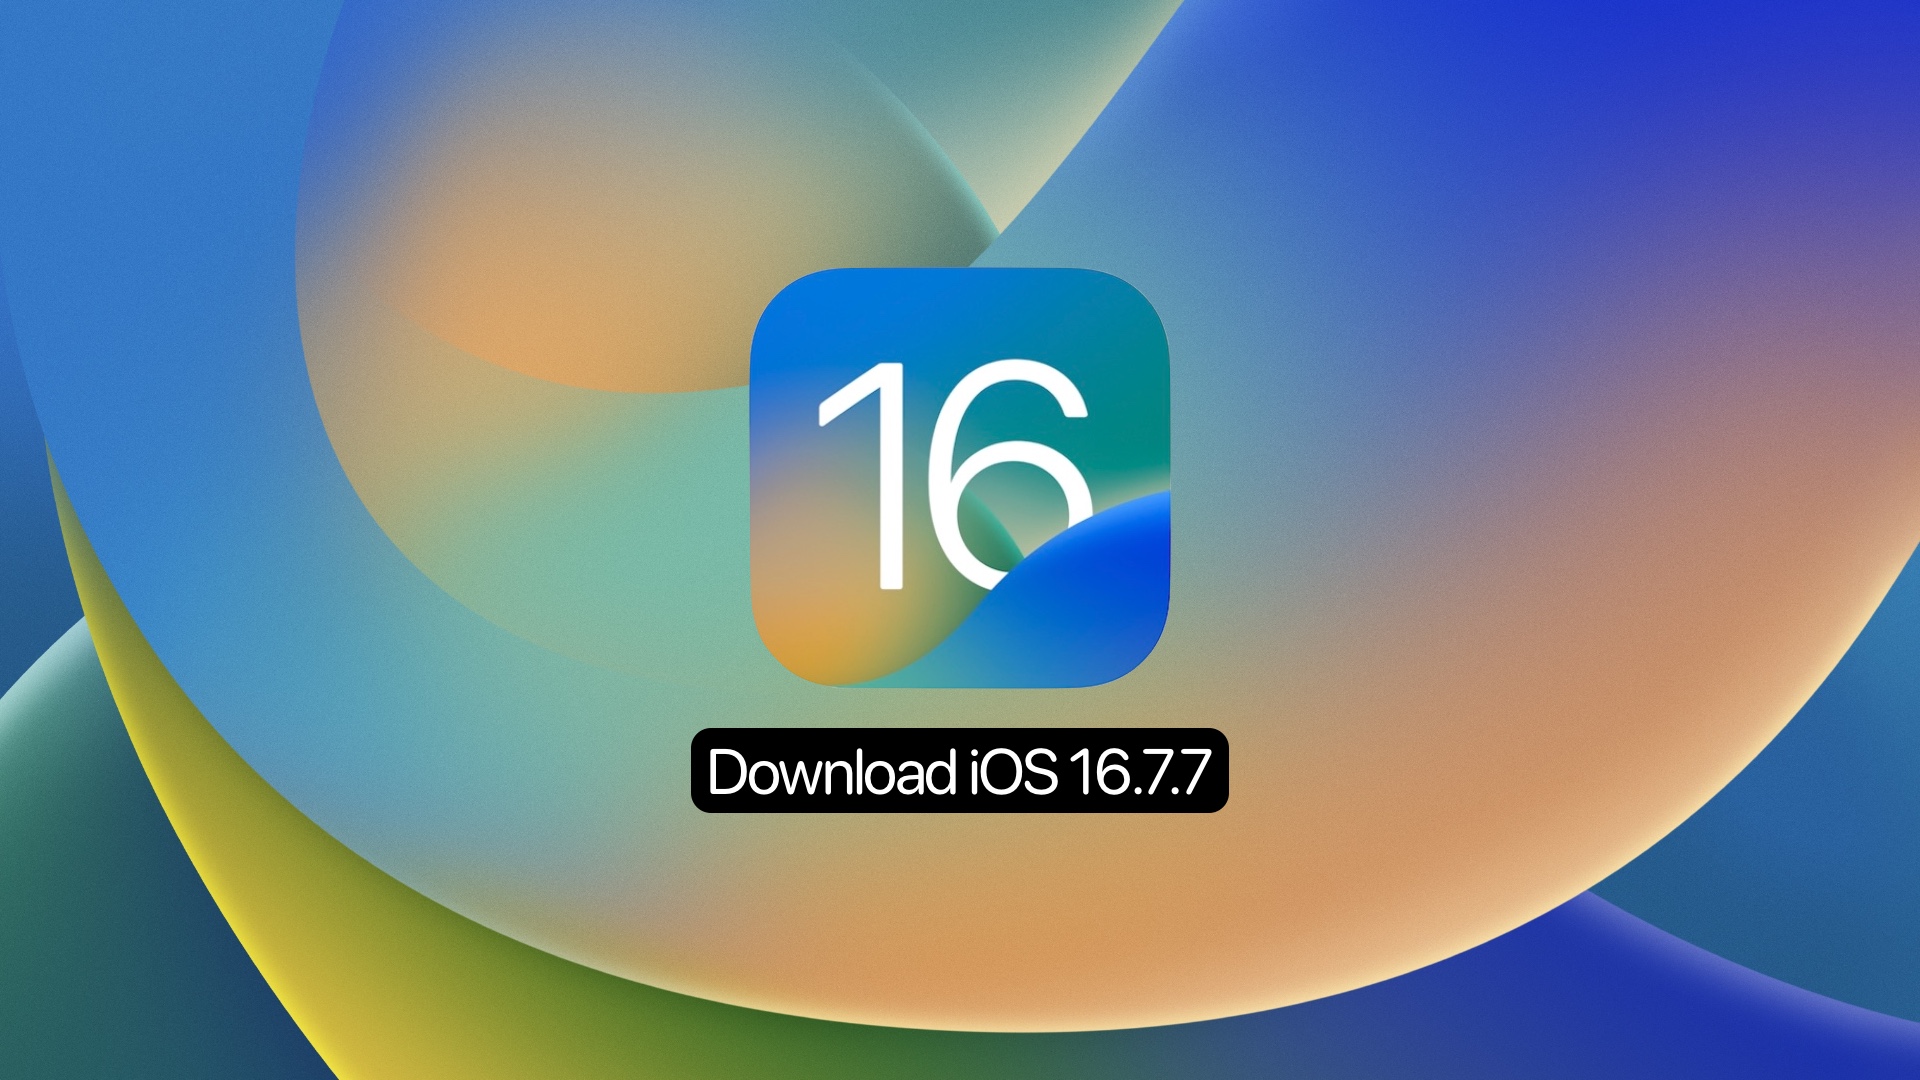 Download iOS 16.7.7